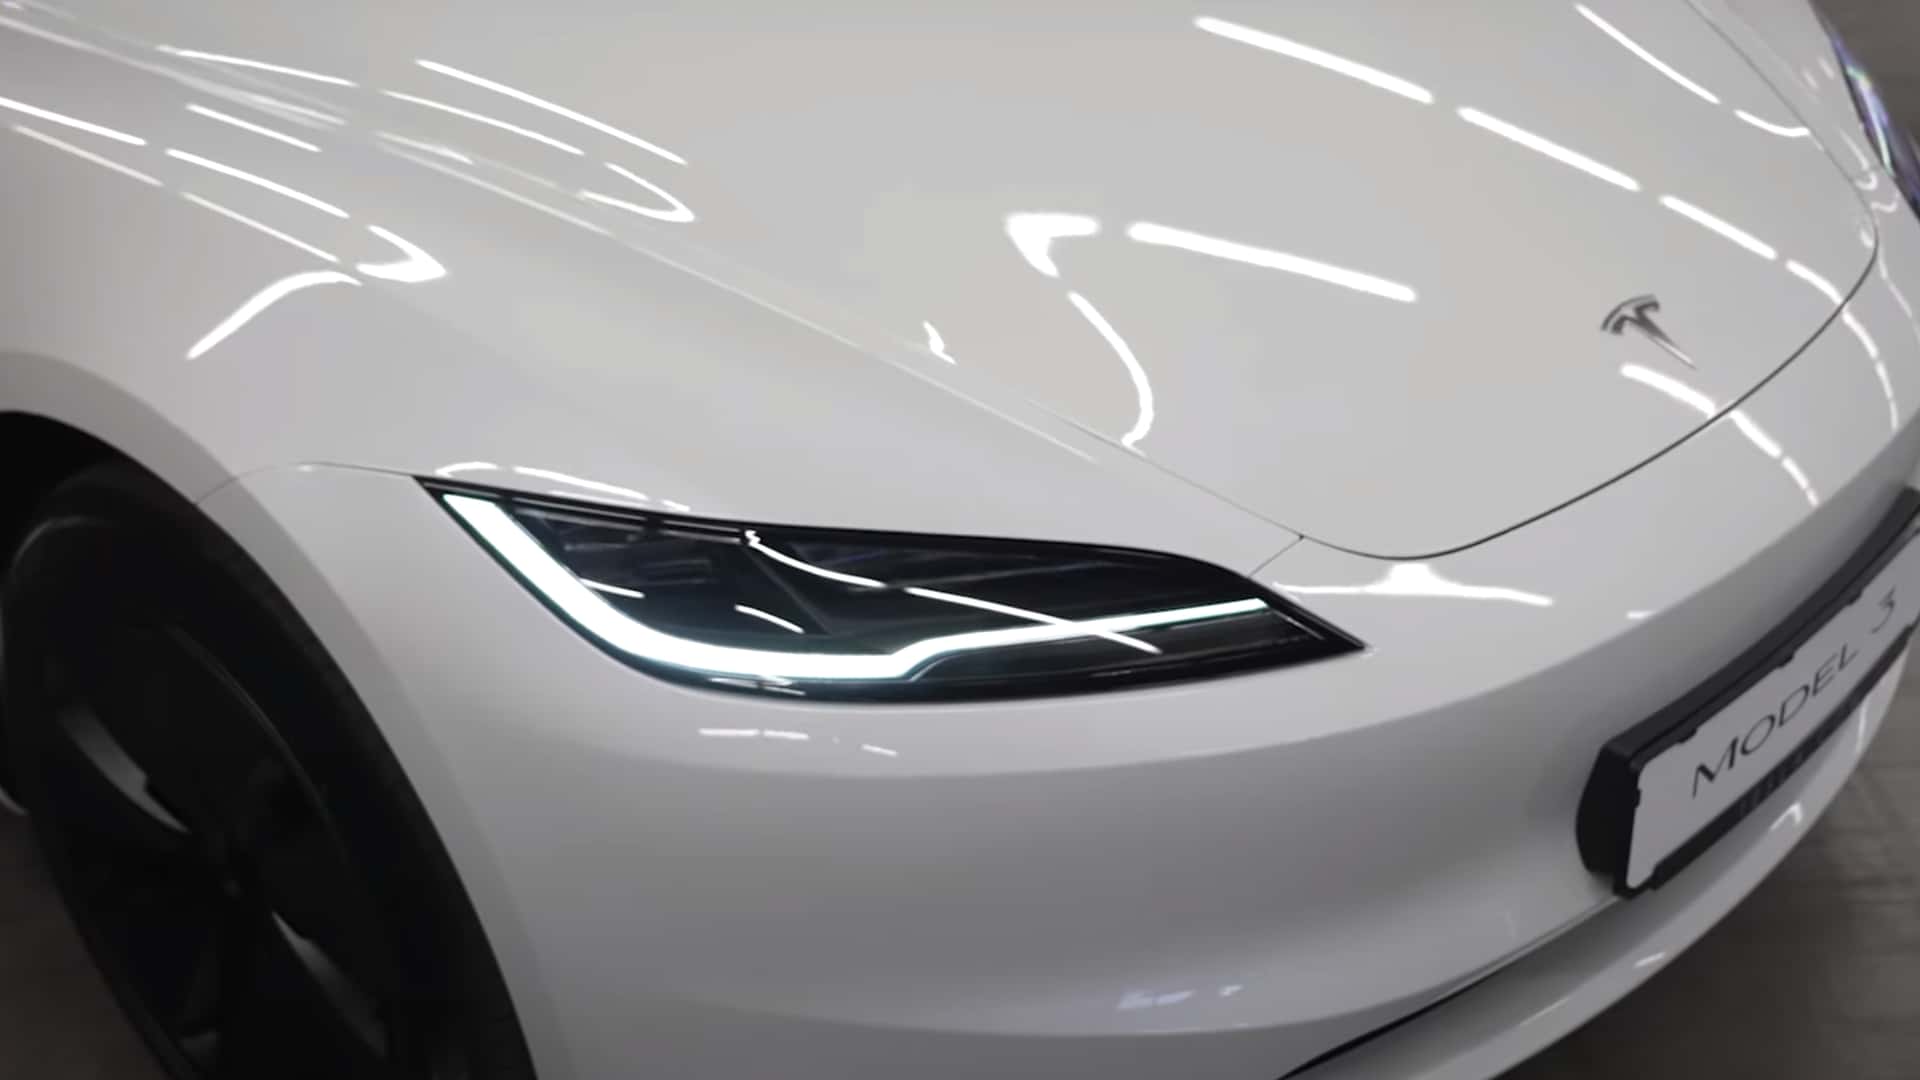 amber reflectors are coming to the u.s.-spec tesla model 3, but the internet disapproves